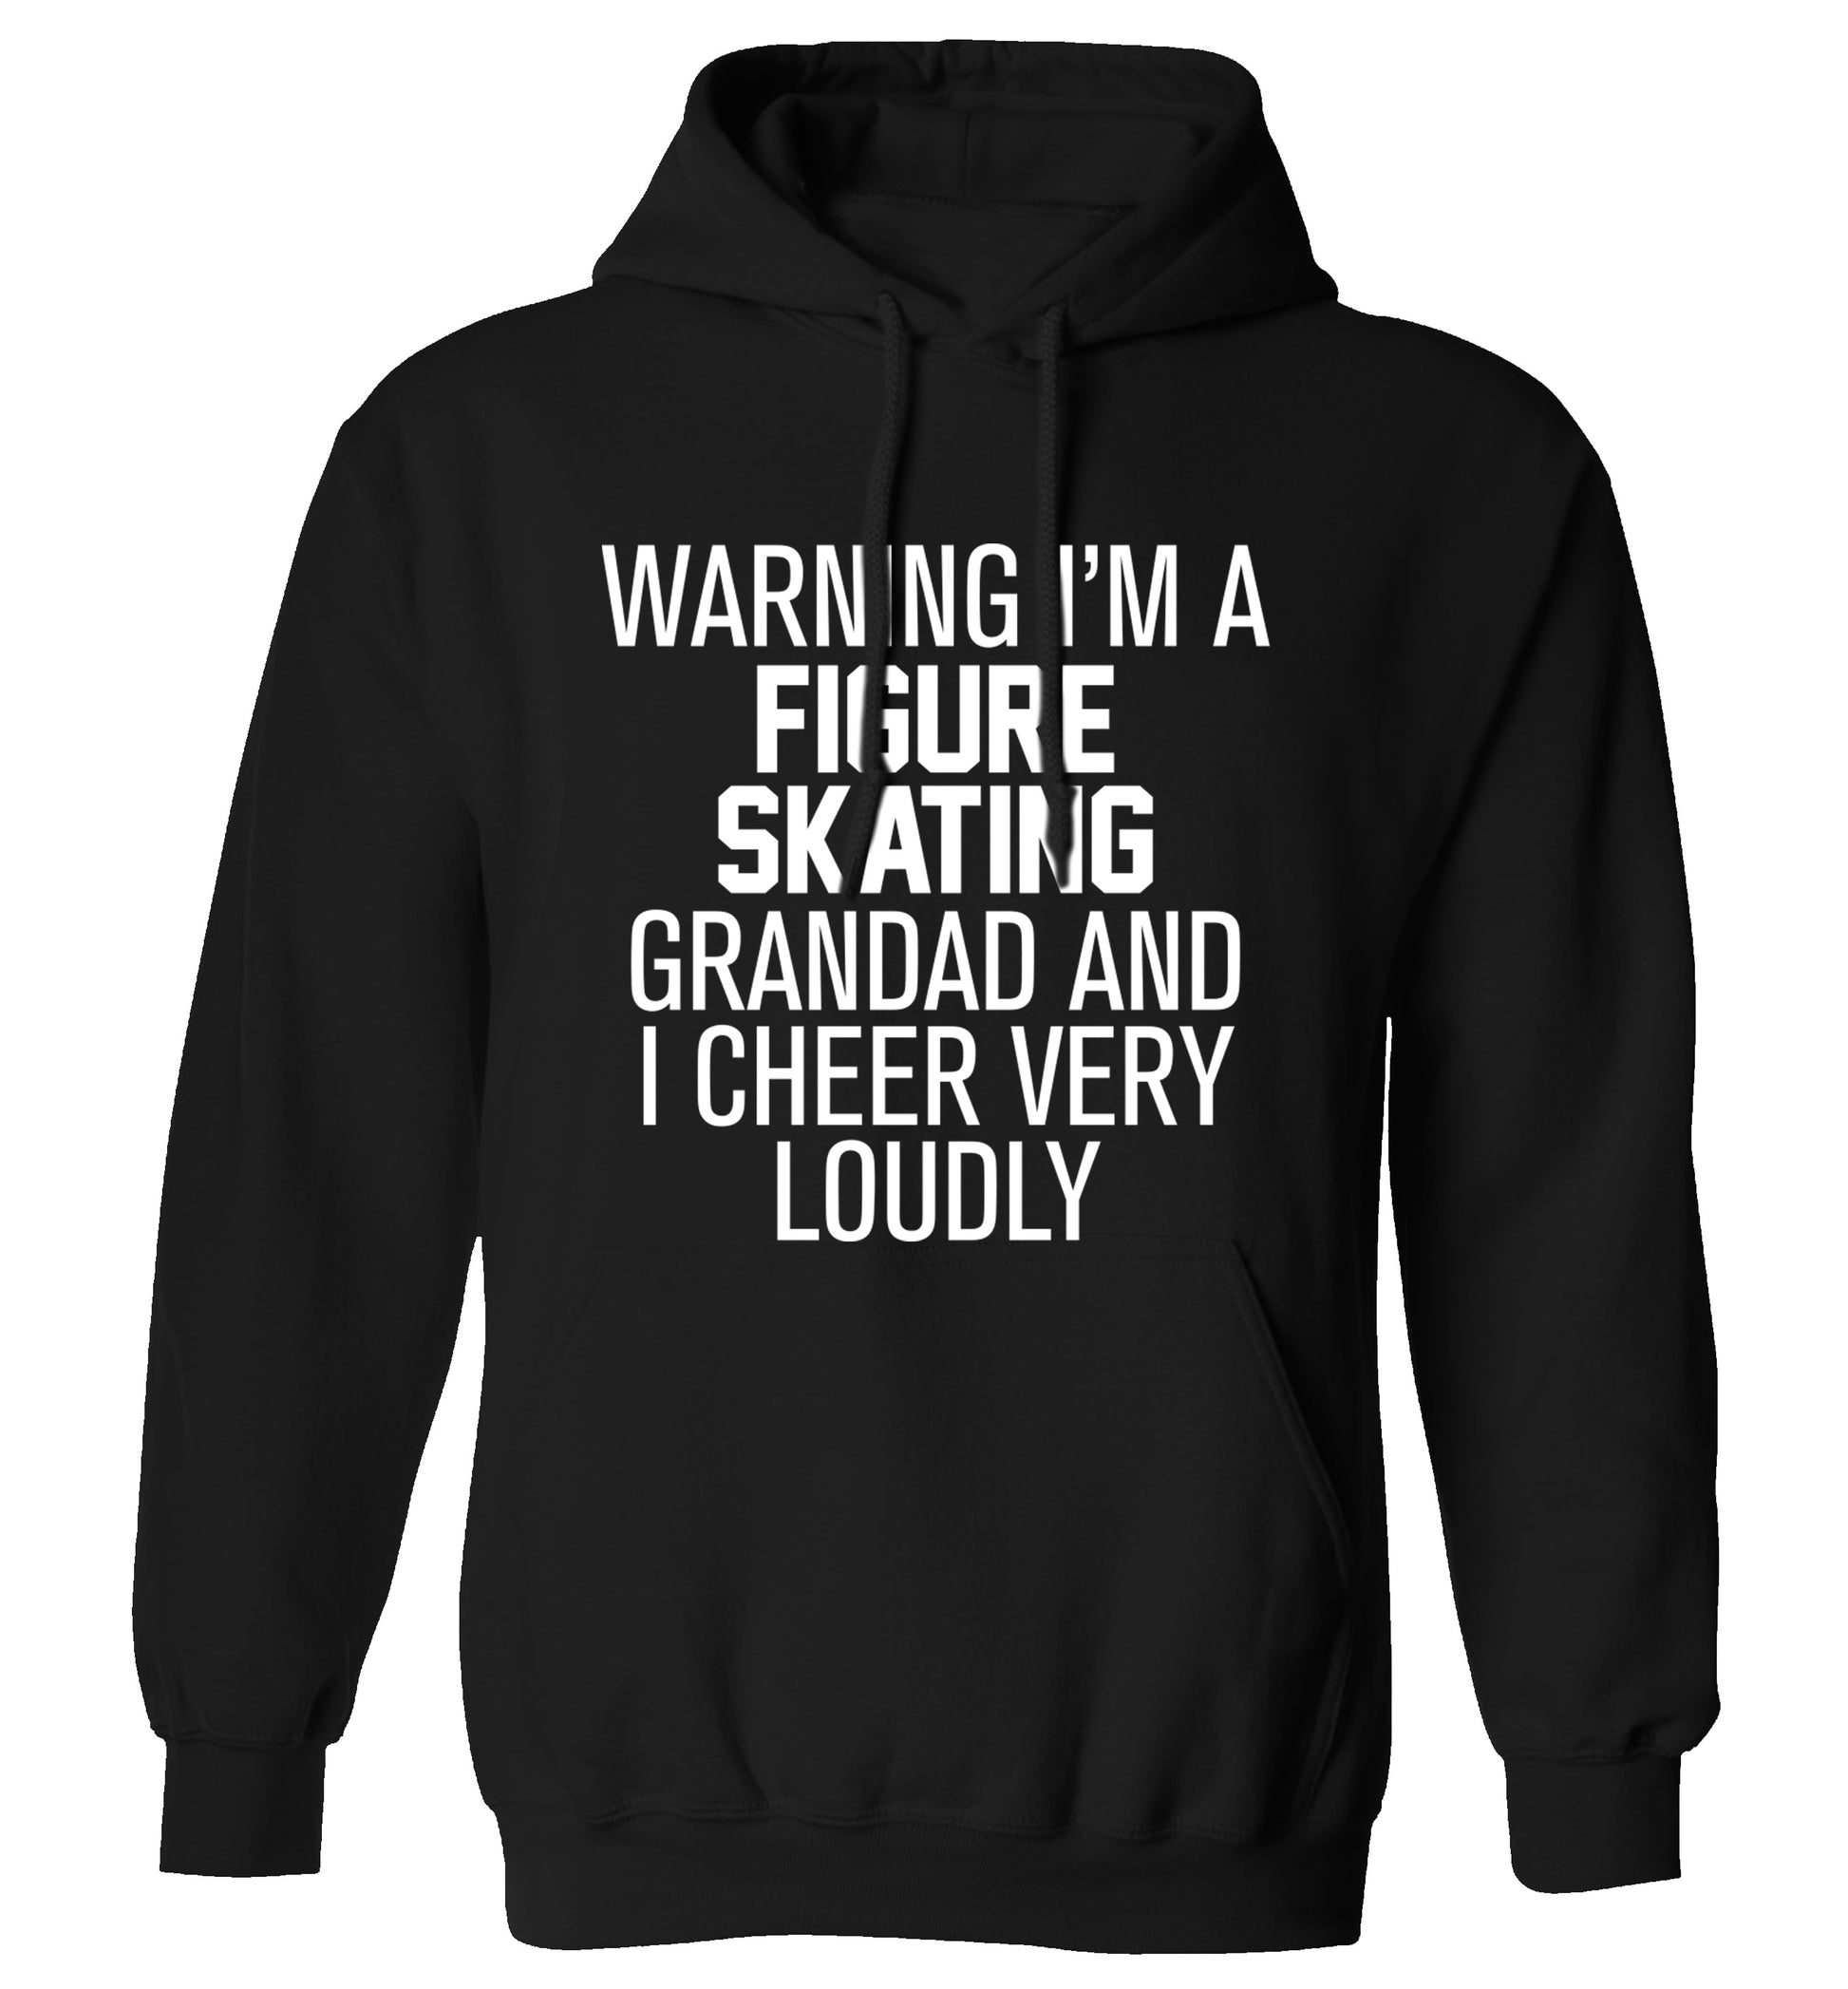 Warning I'm a figure skating grandad and I cheer very loudly adults unisexblack hoodie 2XL